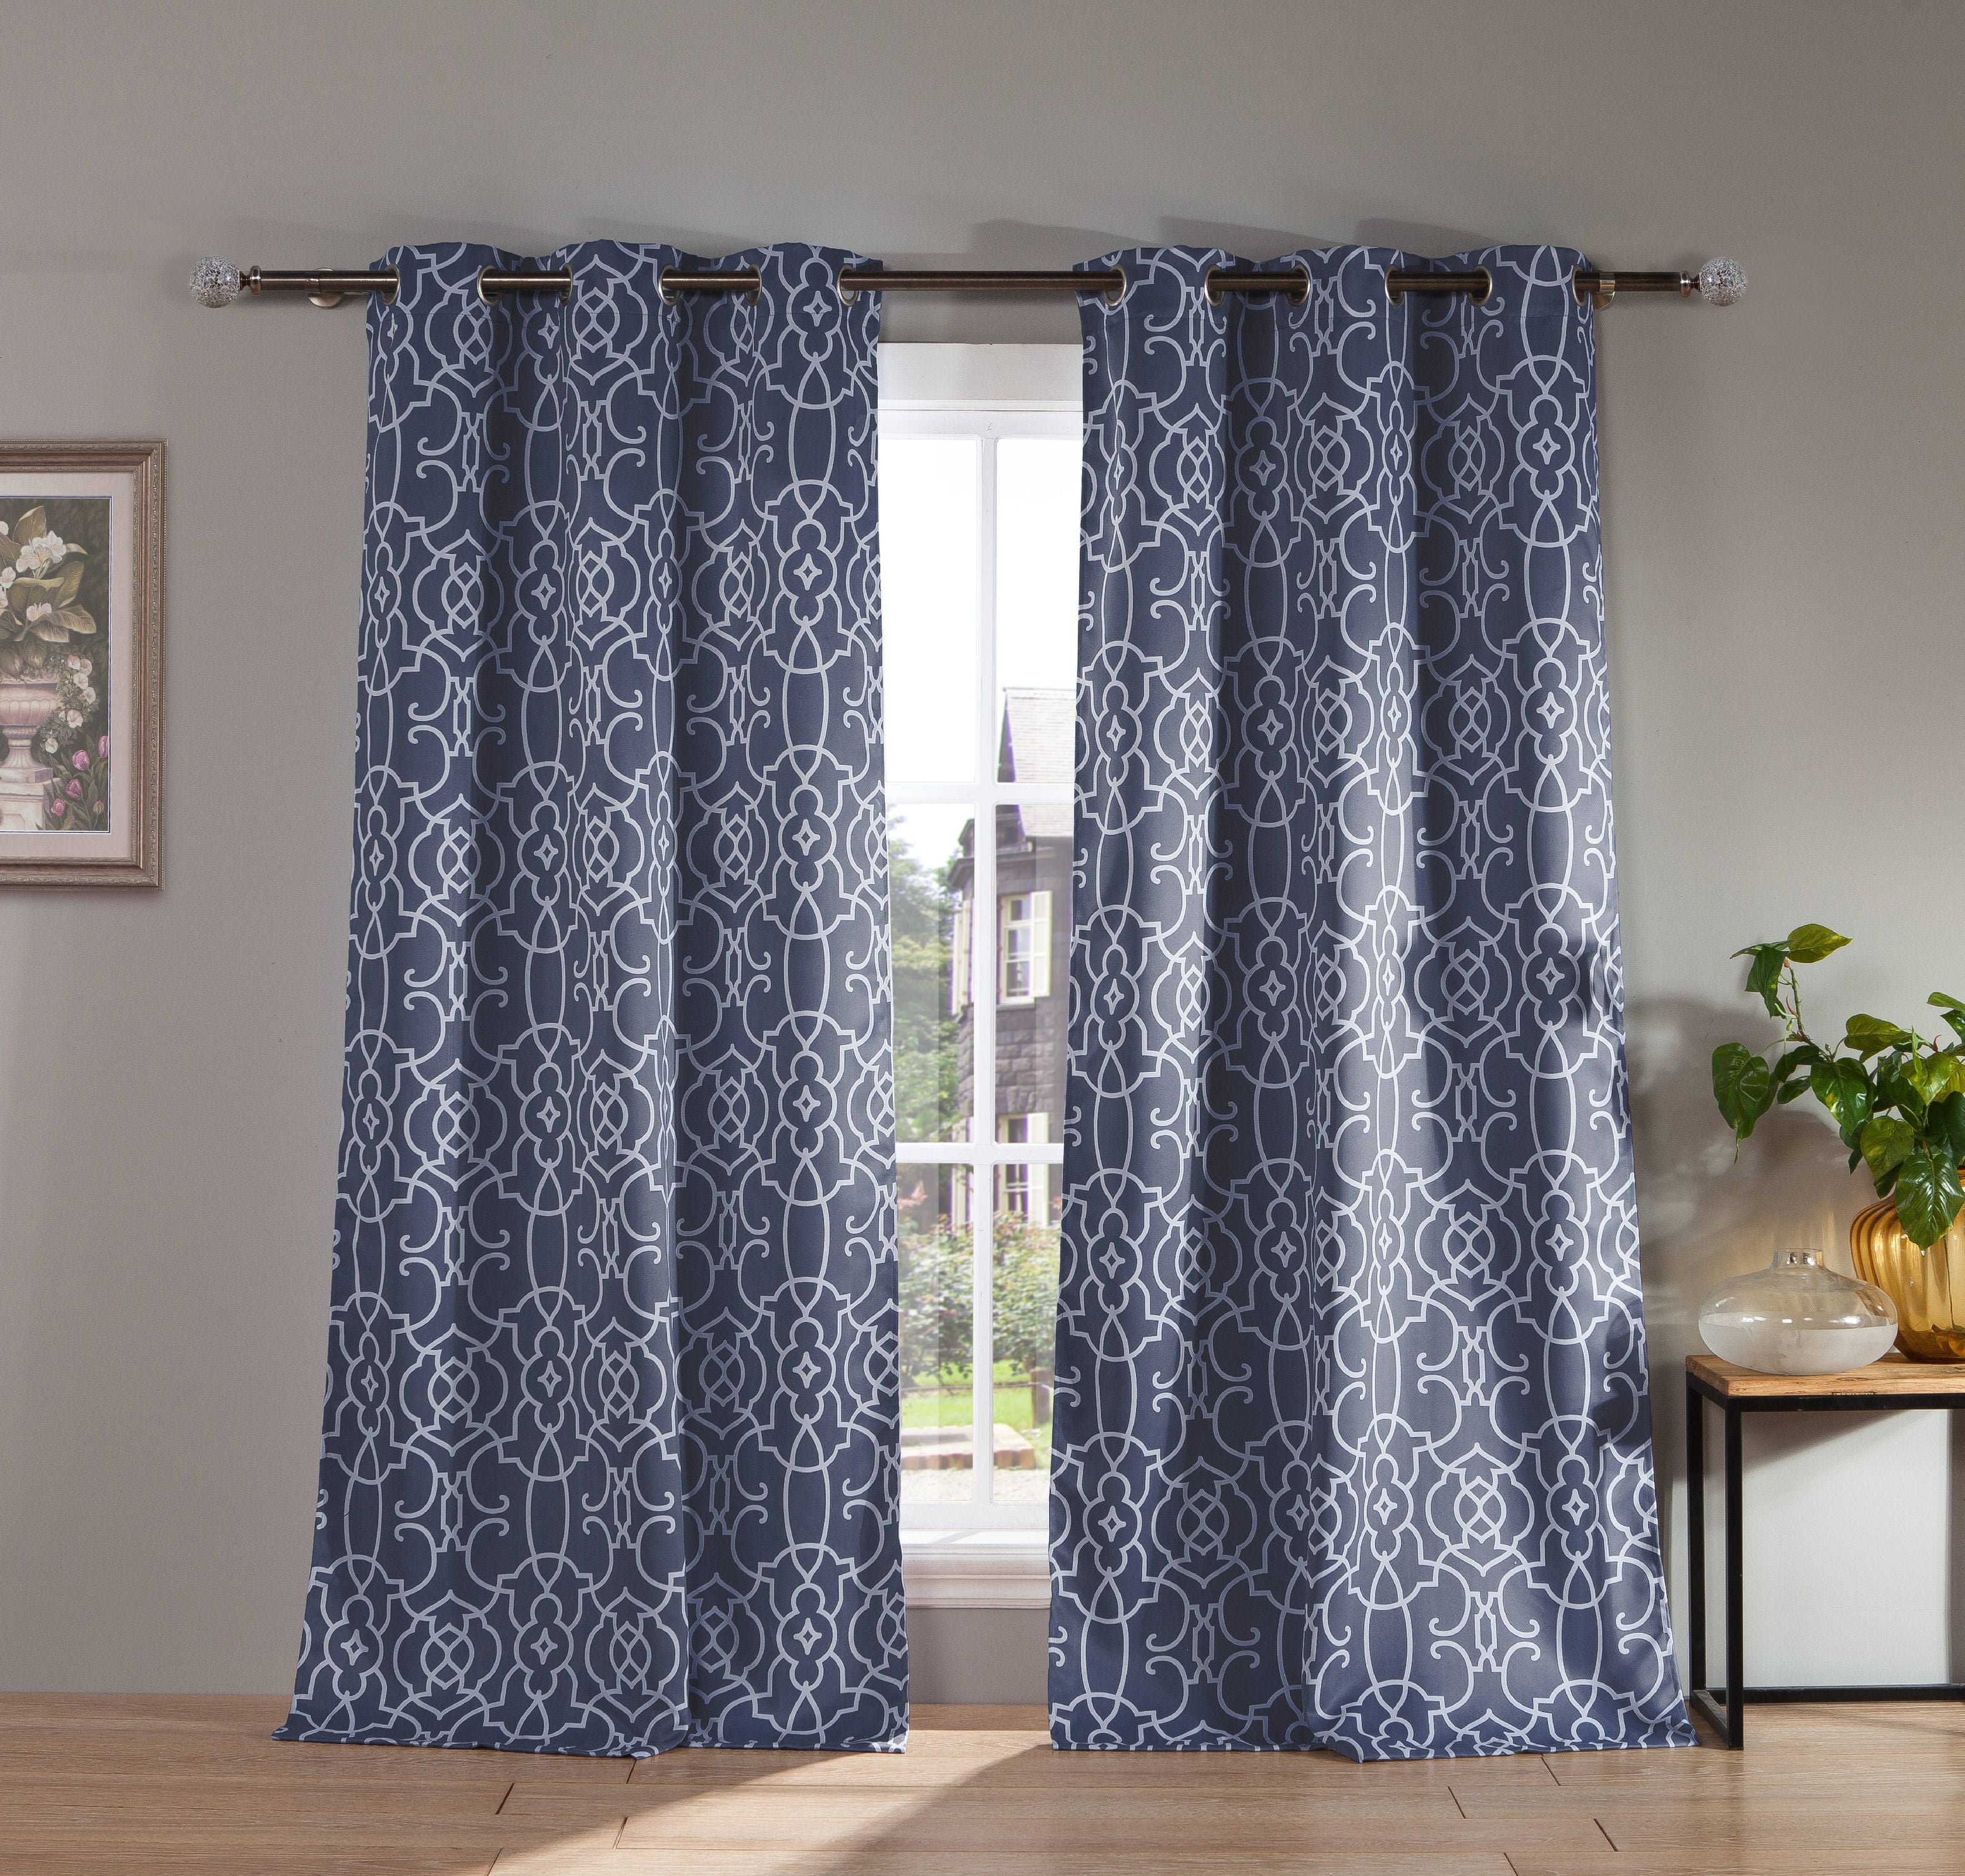 Details about   Mountain River Scenery Waterproof Shower Curtains Curtains for Living Room Gifts 